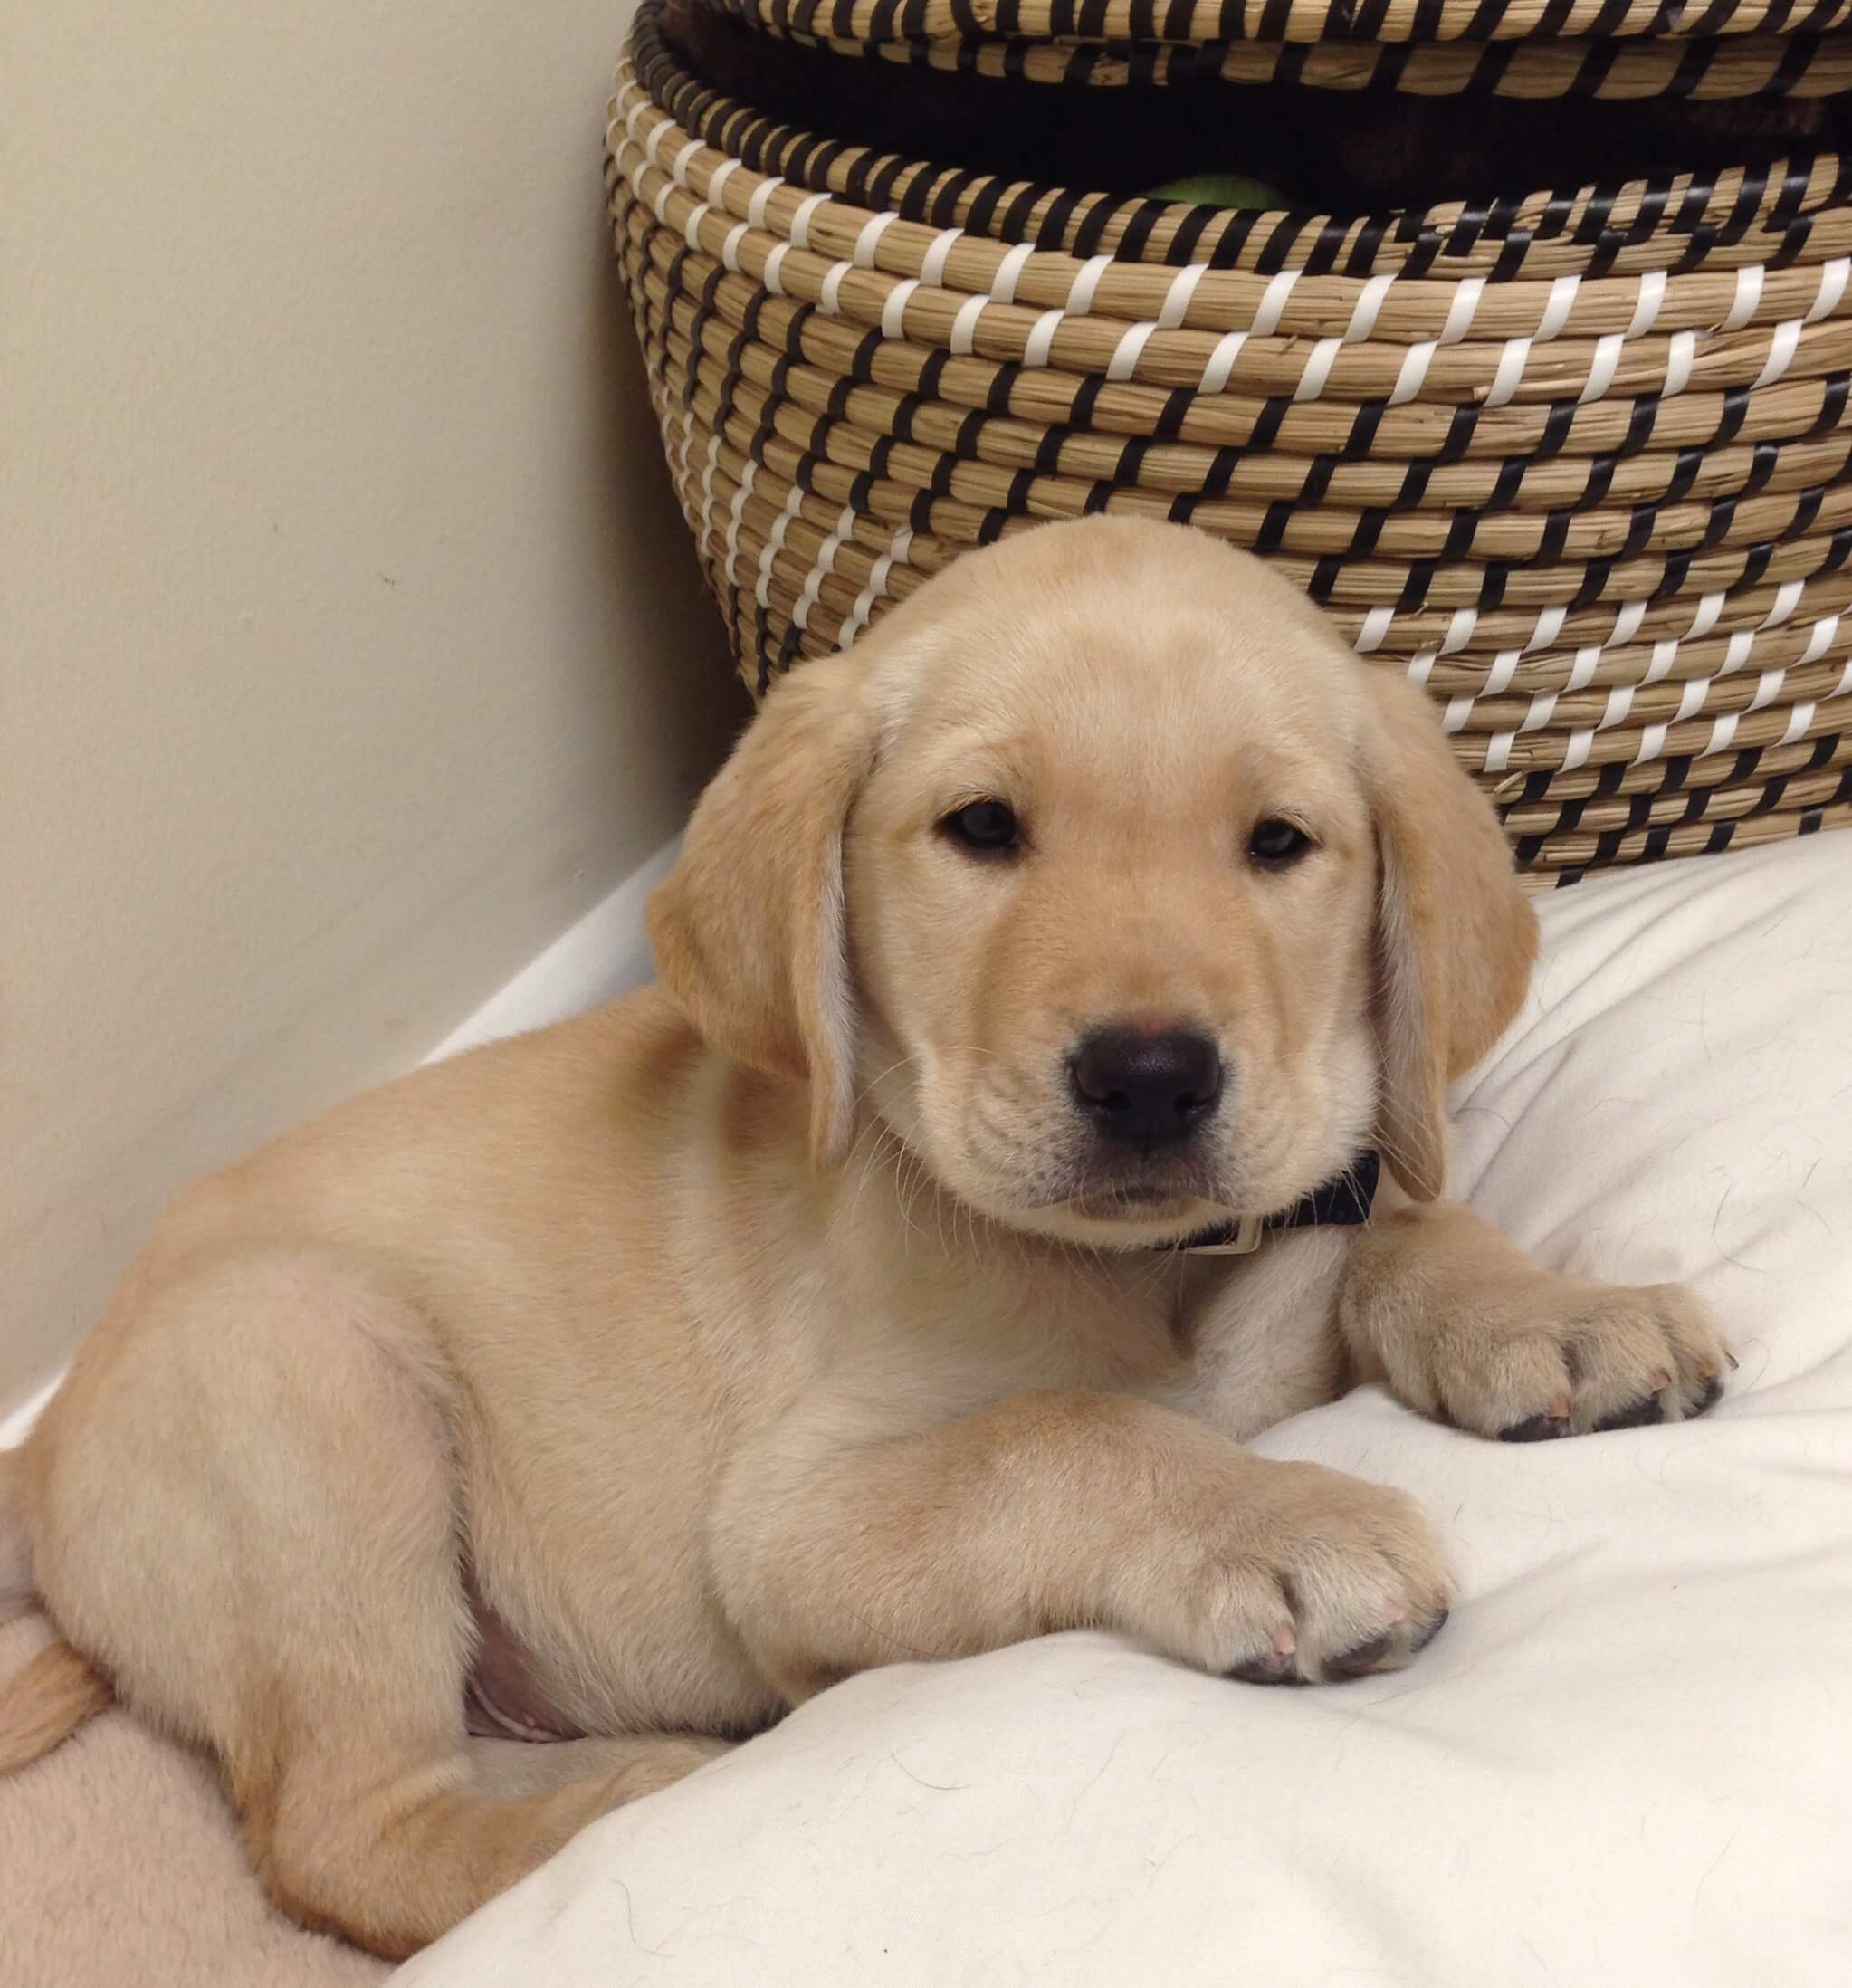 The Guiding Eyes "TODAY" yellow Lab pup at 8 weeks old